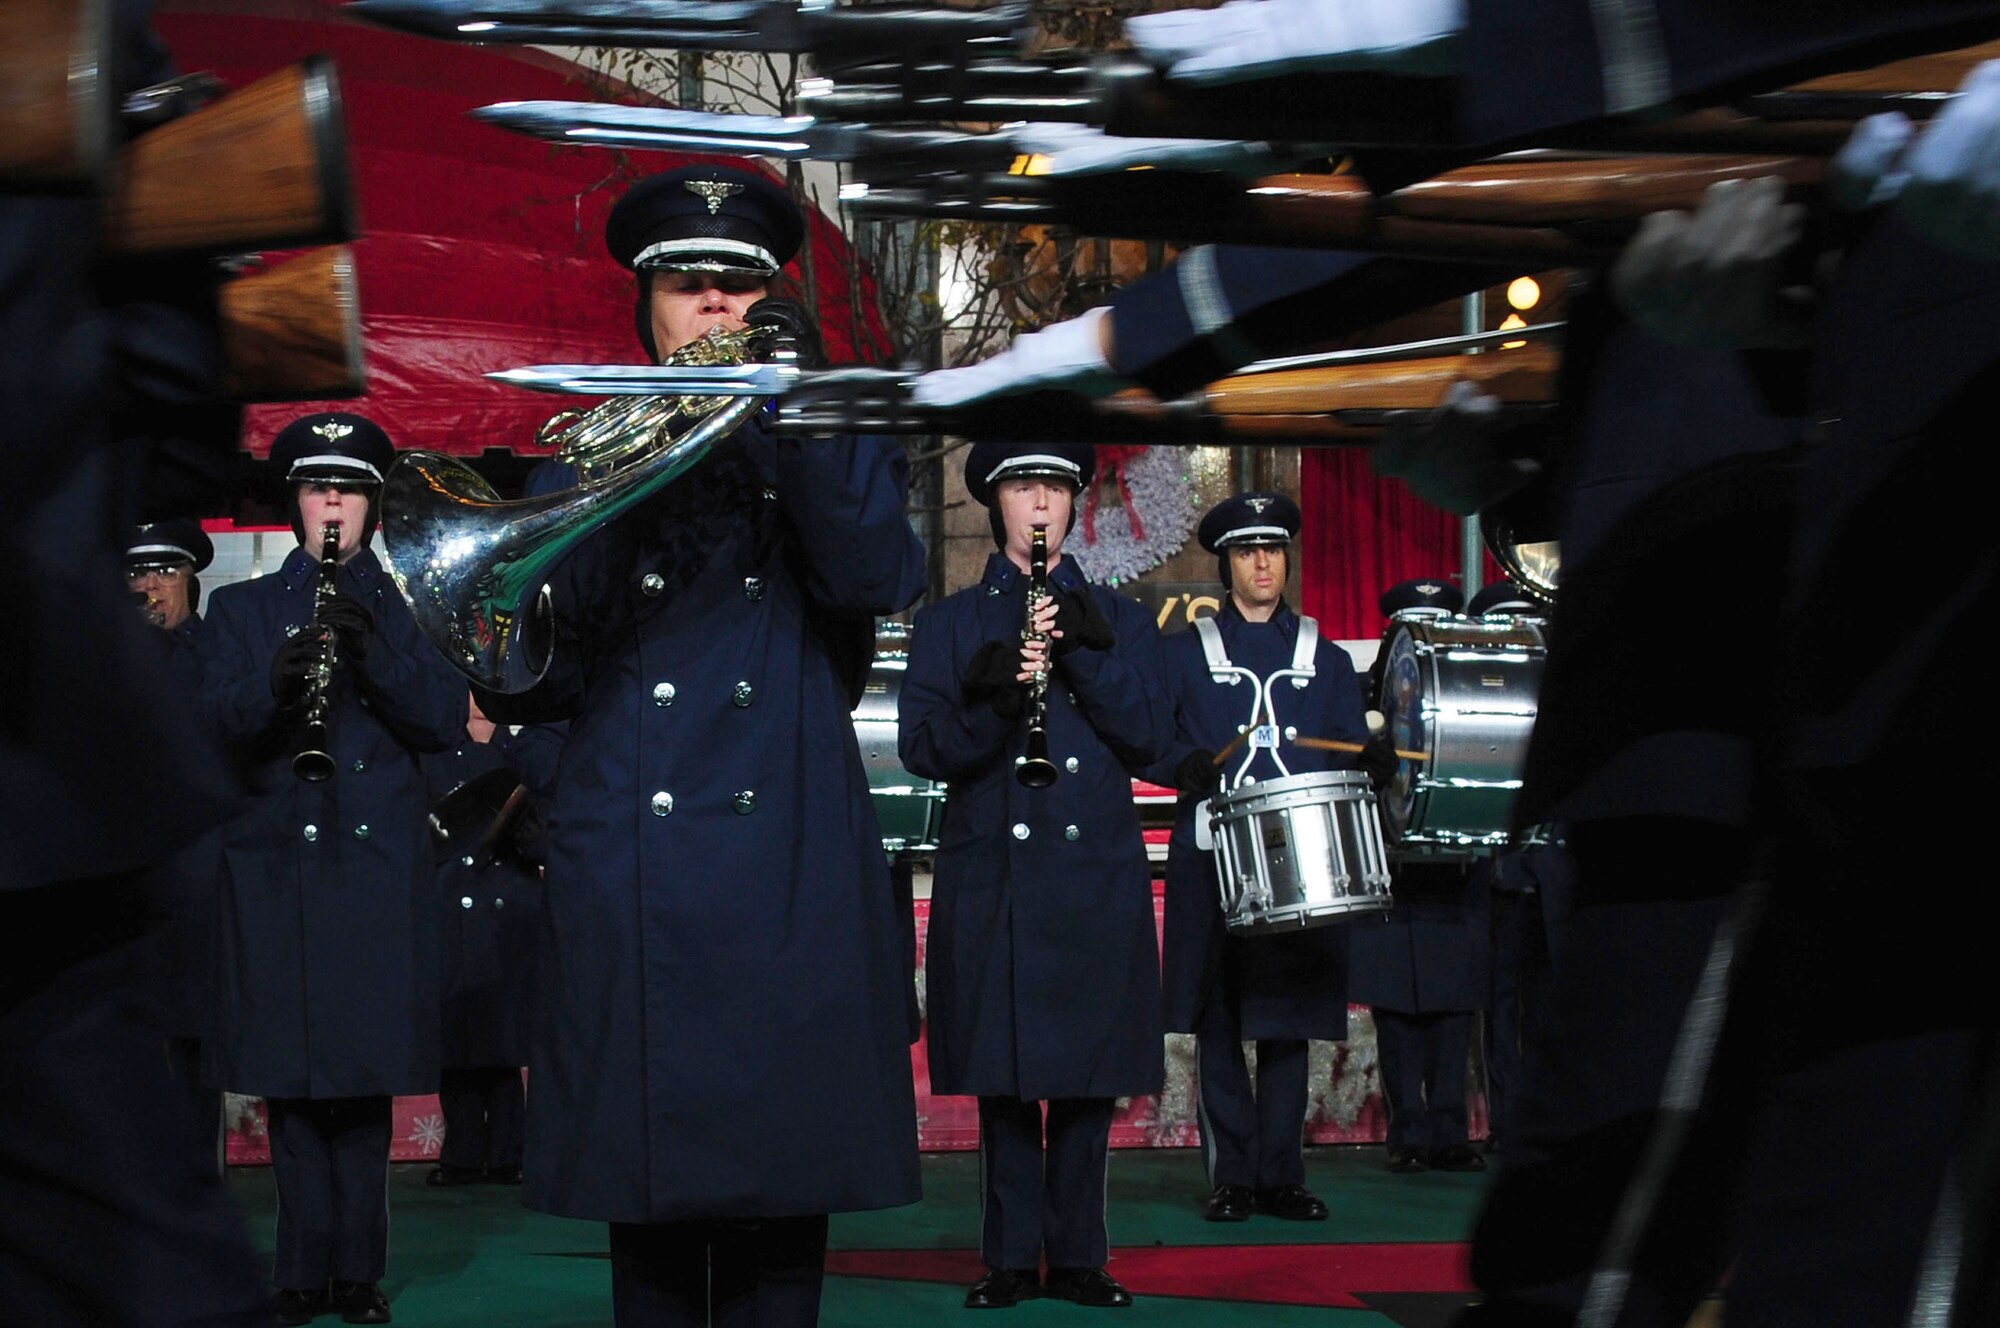 The U.S. Air Force Band performs as the U.S. Air Force Honor Guard marches by during a rehearsal prior to the 86th Annual Macy?s Thanksgiving Day Parade at Herald Square, Nov. 22, 2012, in New York City. The USAF Honor Guard and Band made history when they set foot in New York City for the largest deployment of 11th Operations Group assets outside of the National Capital Region in support of the parade for the very first time. (U.S. Air Force photo by Senior Airman Steele C. G. Britton)